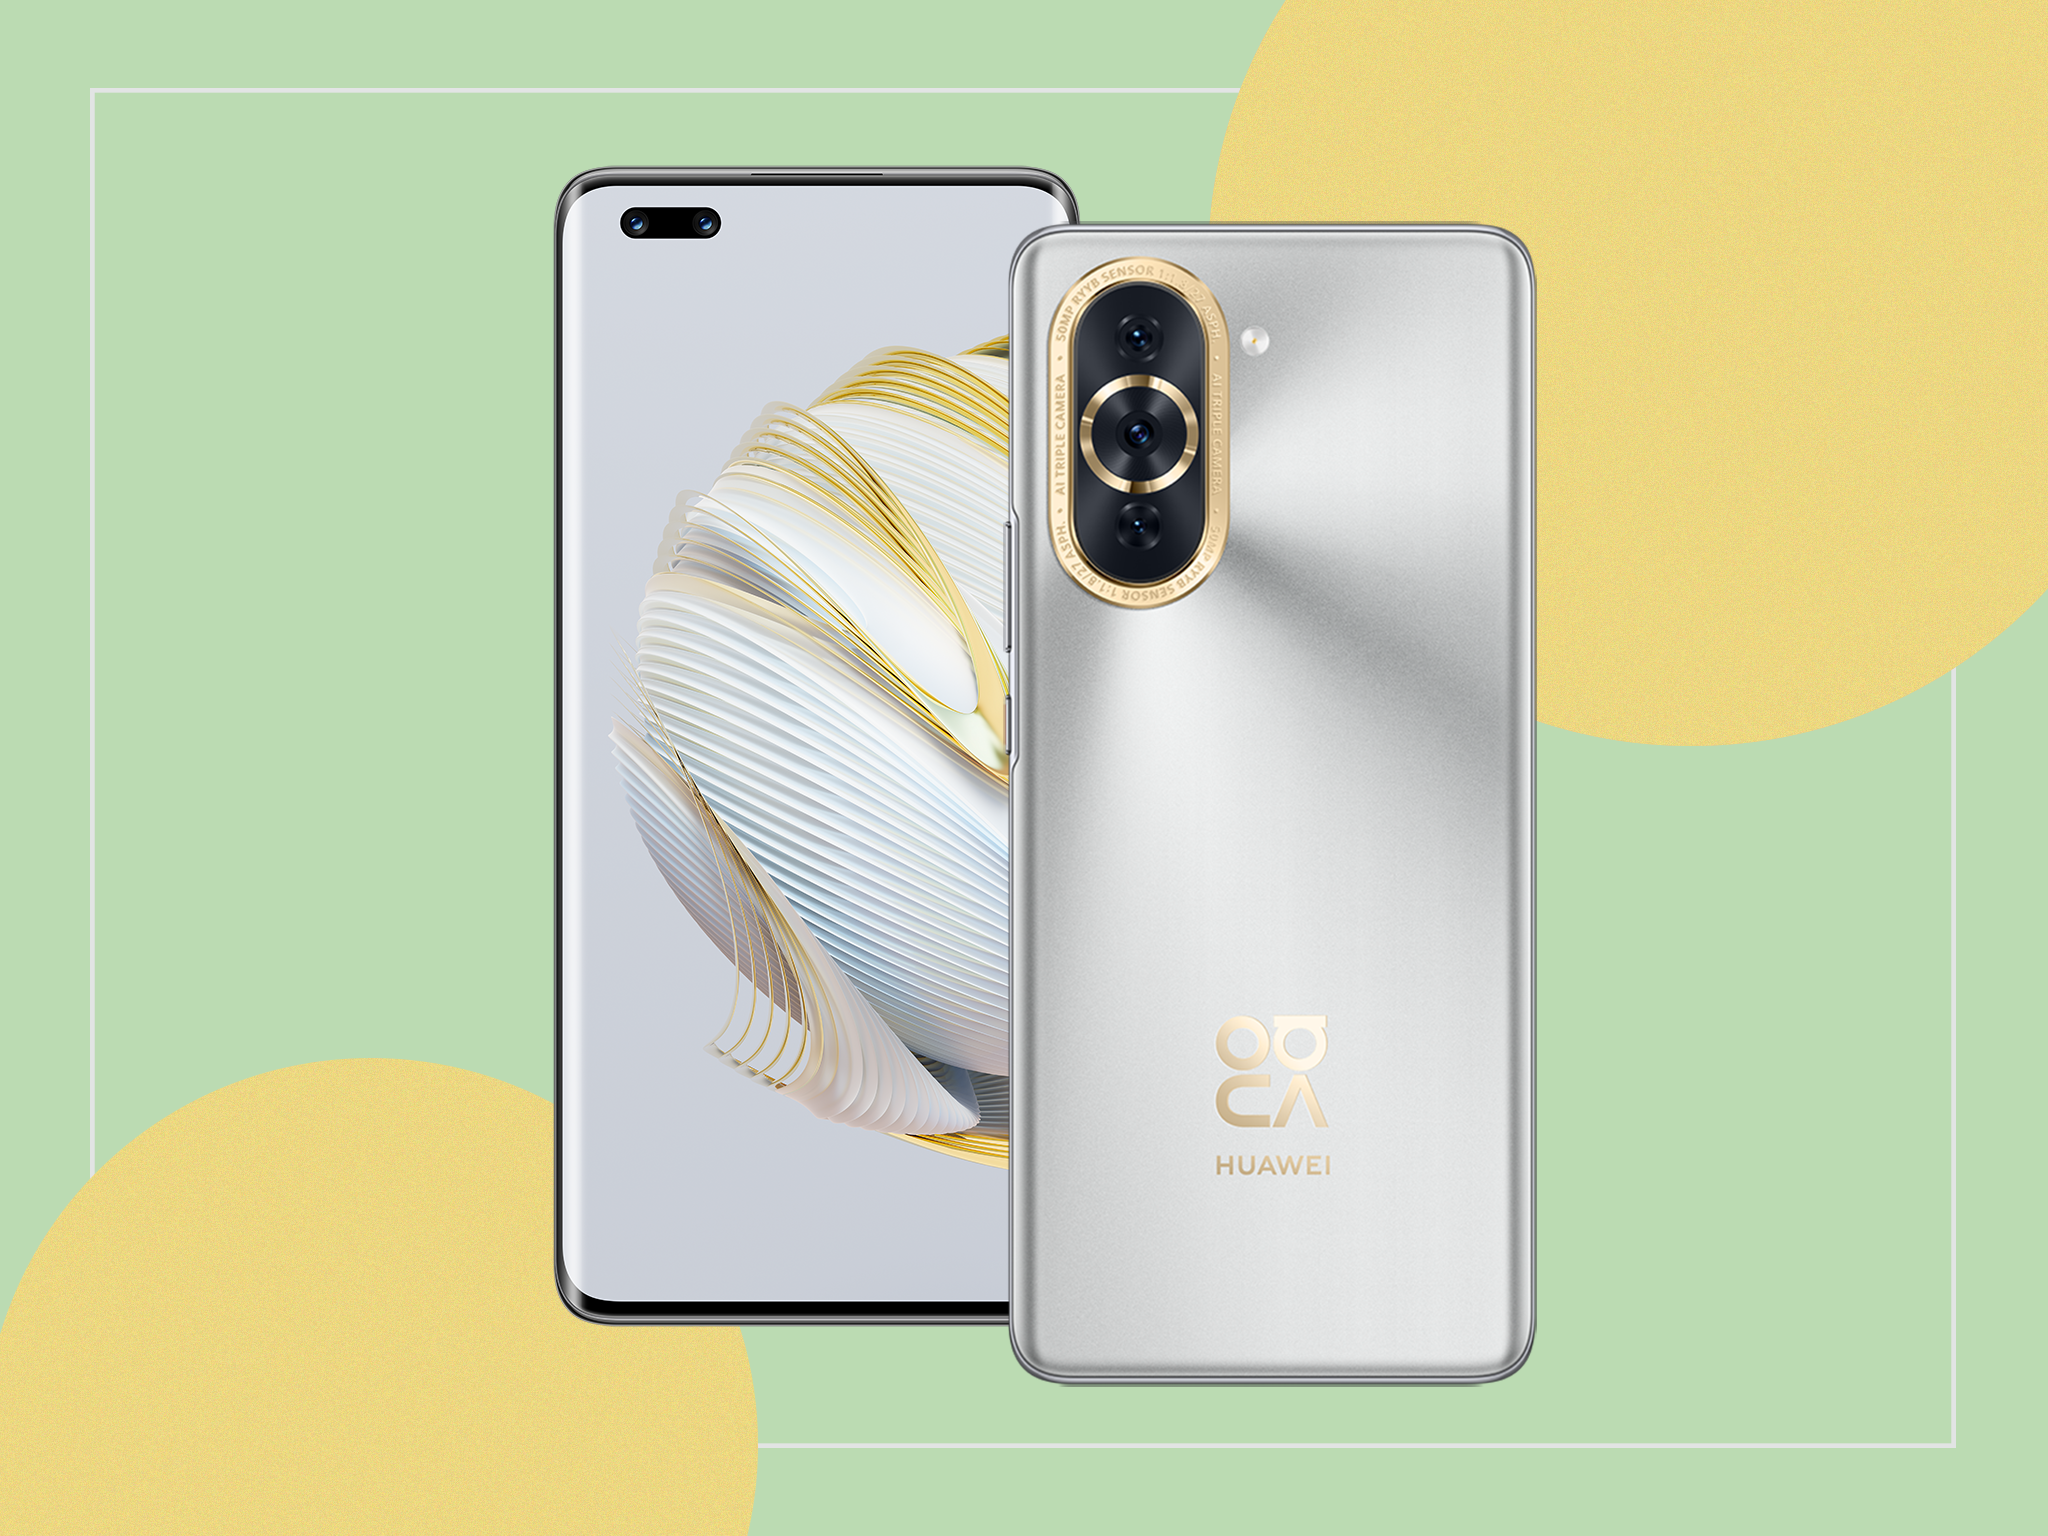 The nova 10 pro features an eye-catch rear plate with a gold-ringed camera array